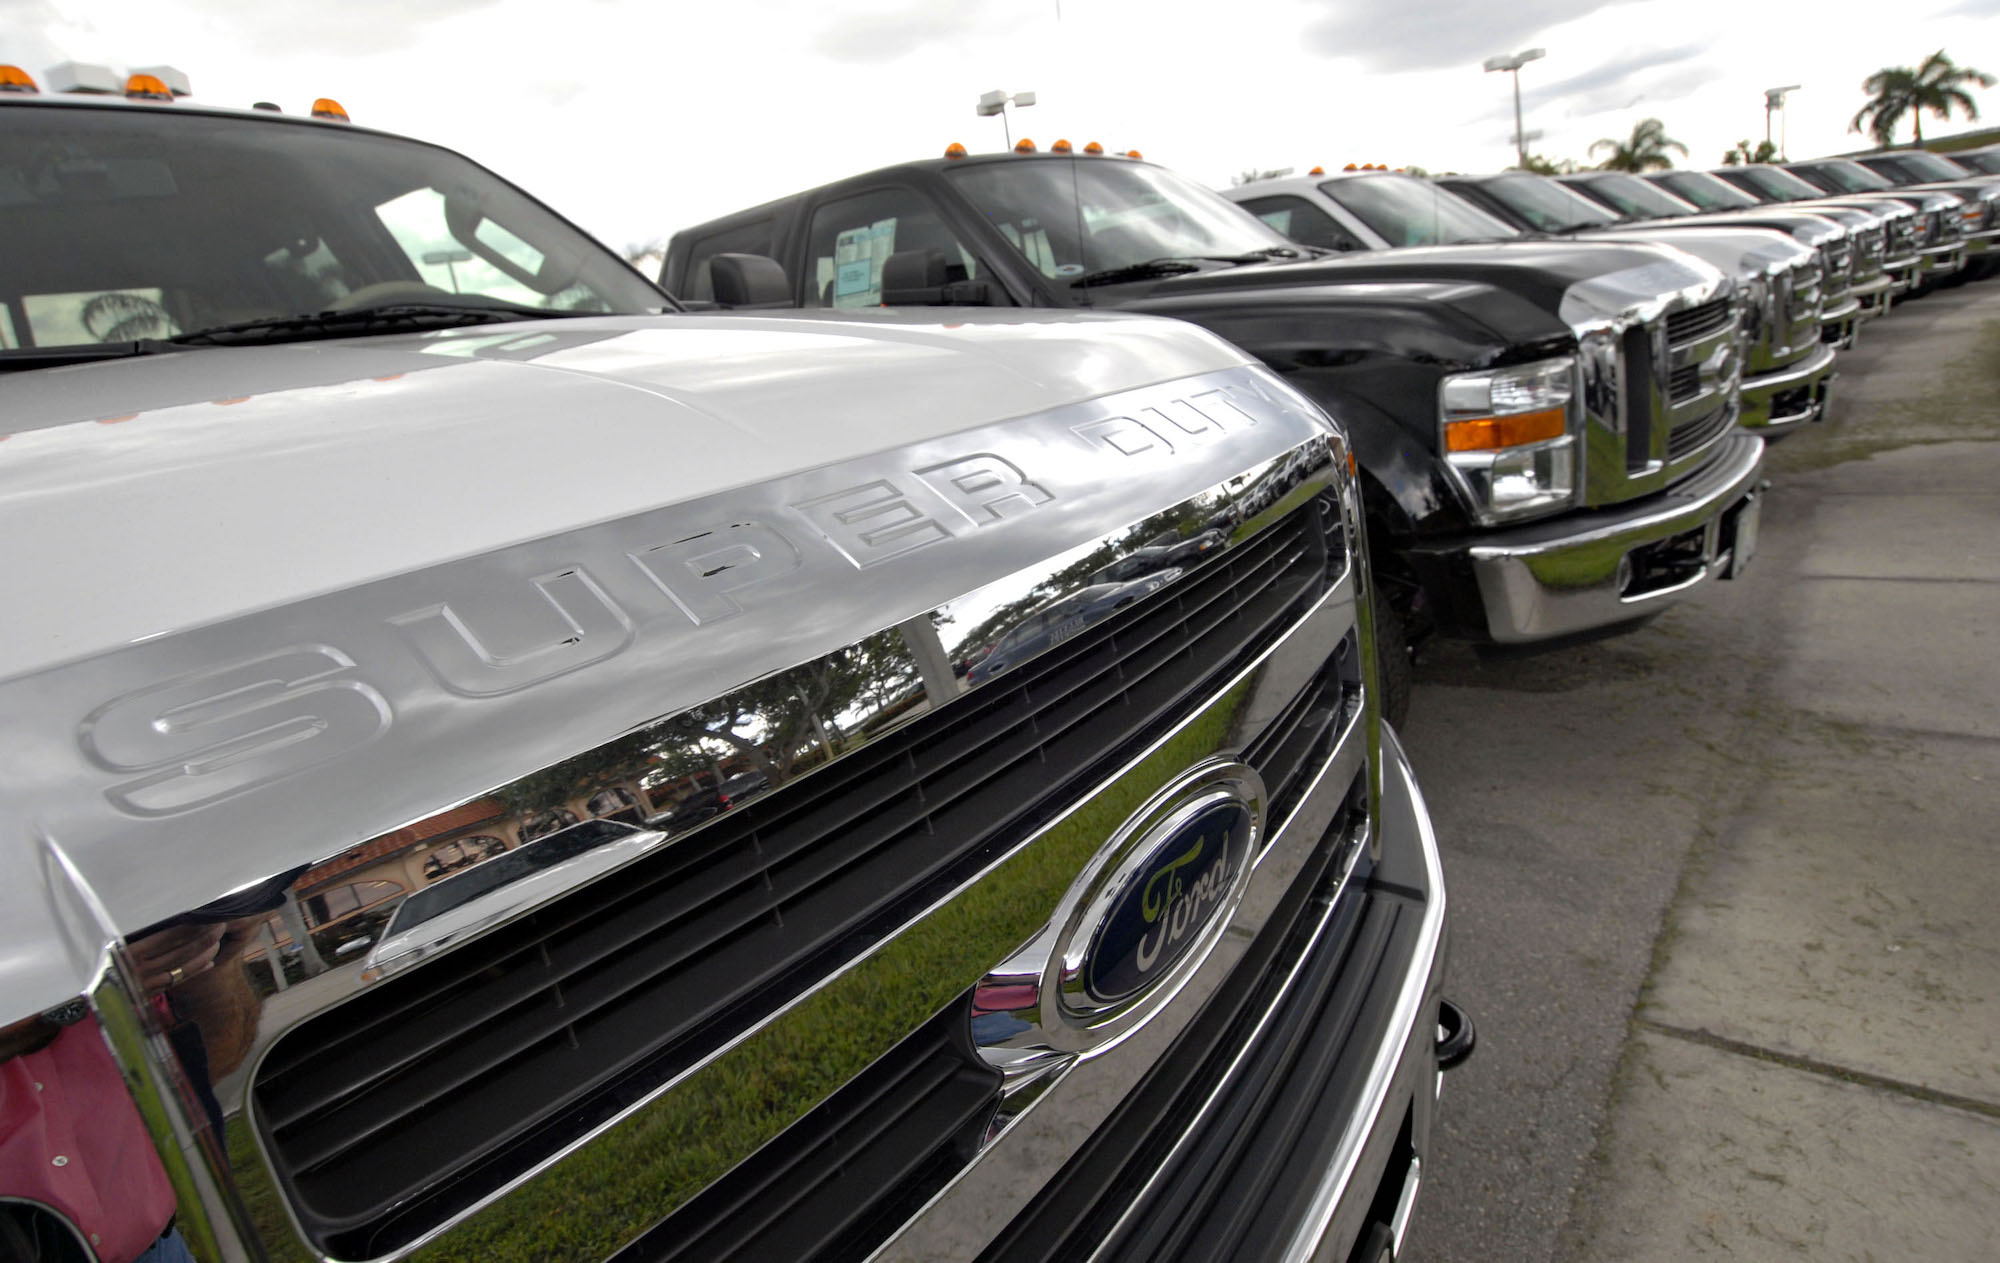 Ford Super Duty F-250 trucks sit on display at Sawgrass Ford in Sunrise, Florida, on Friday, July 20, 2007